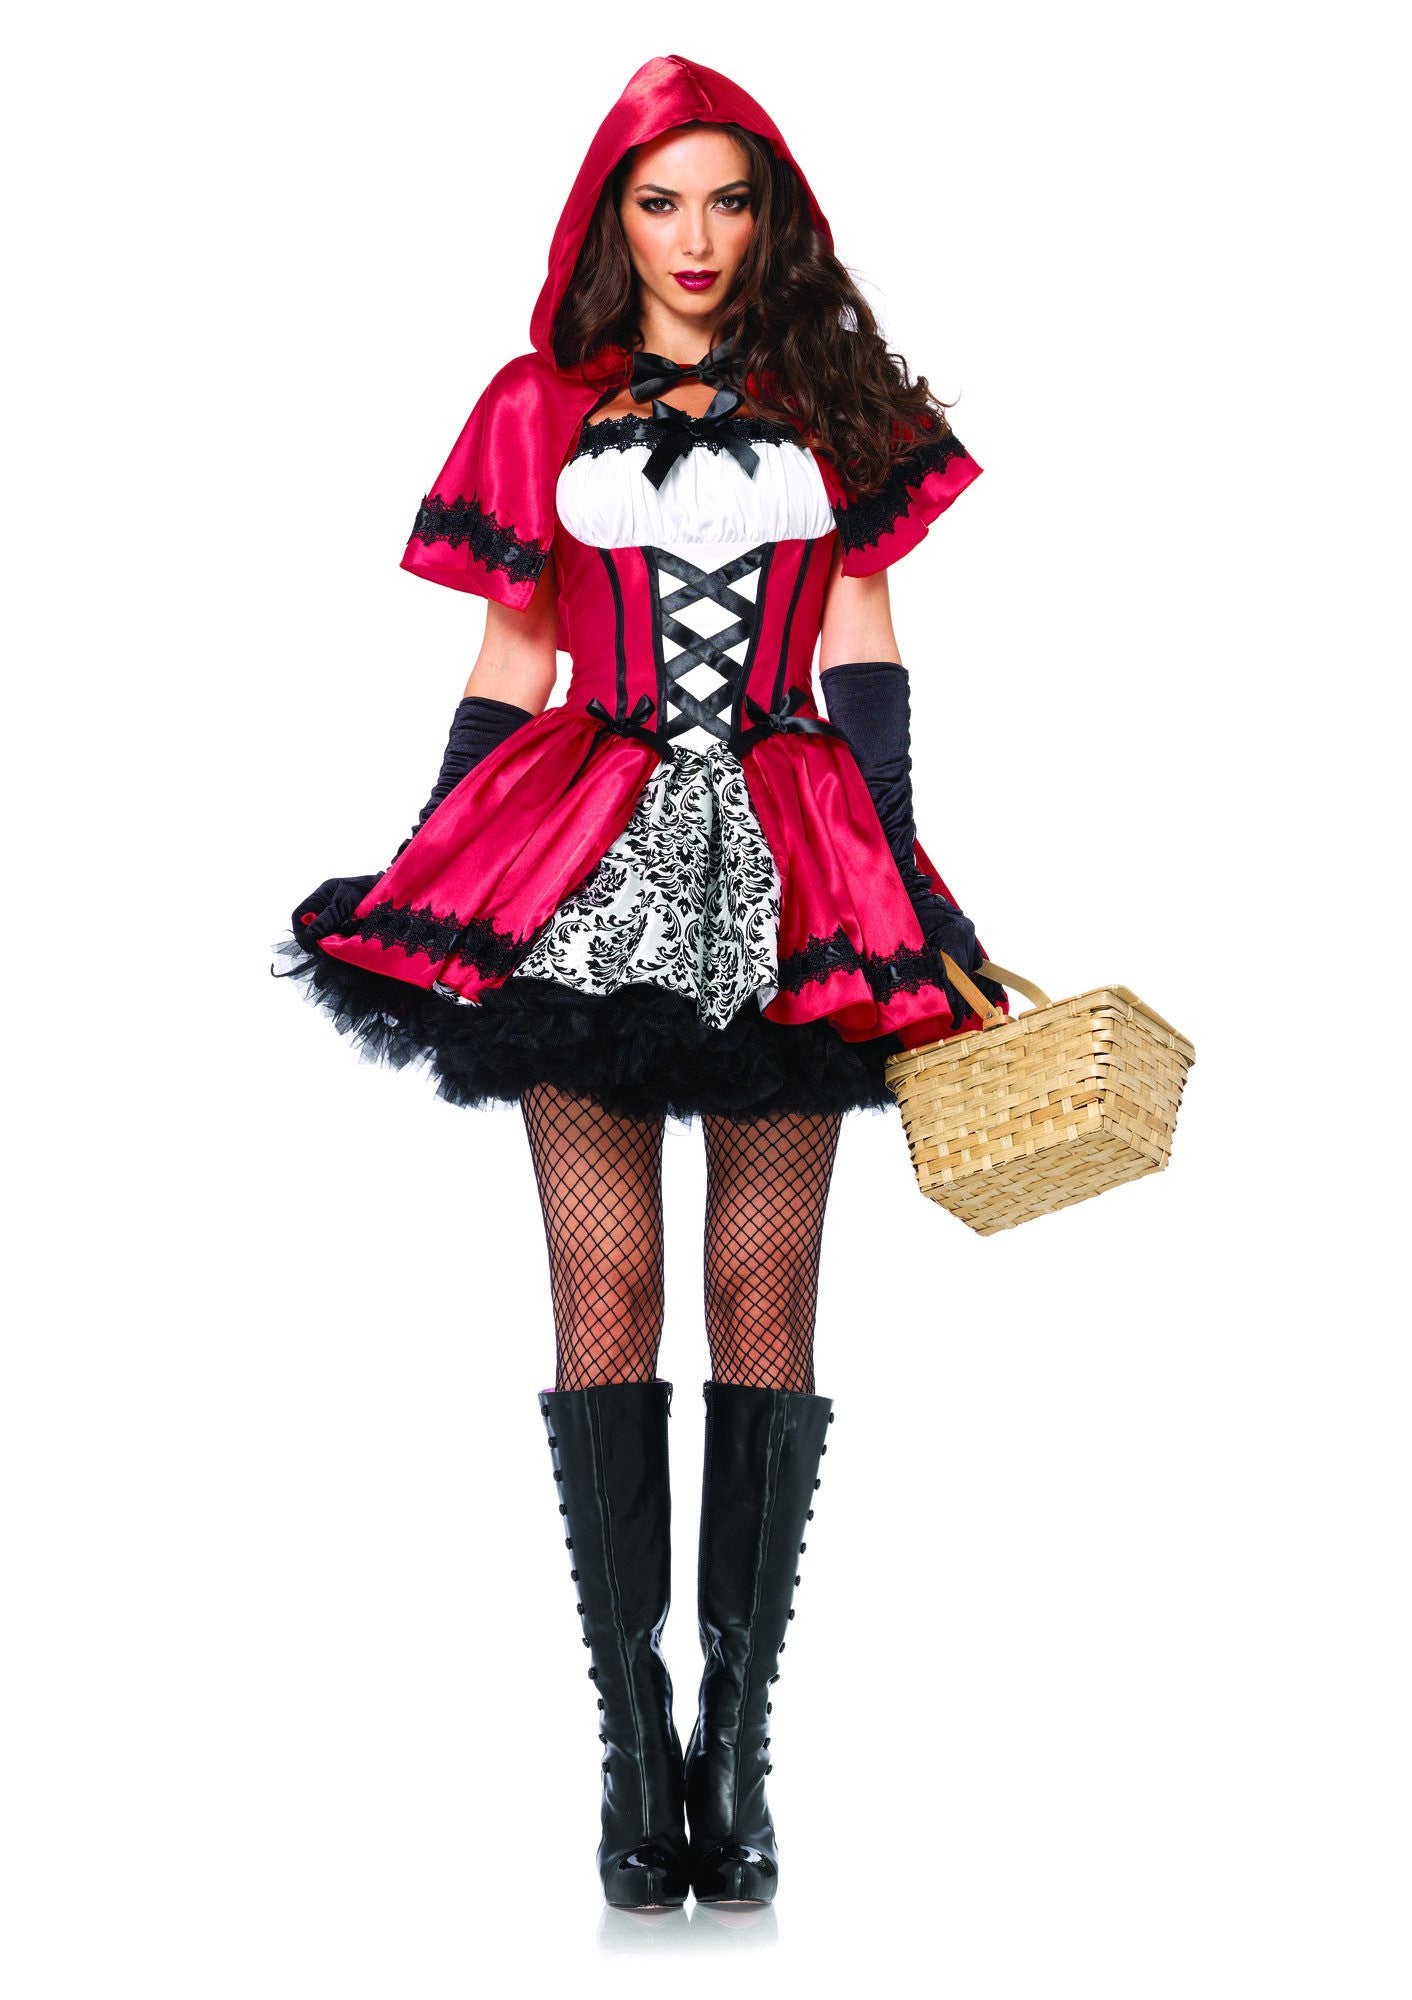 Costume - Gothic Red Costume - Little Red Riding Hood